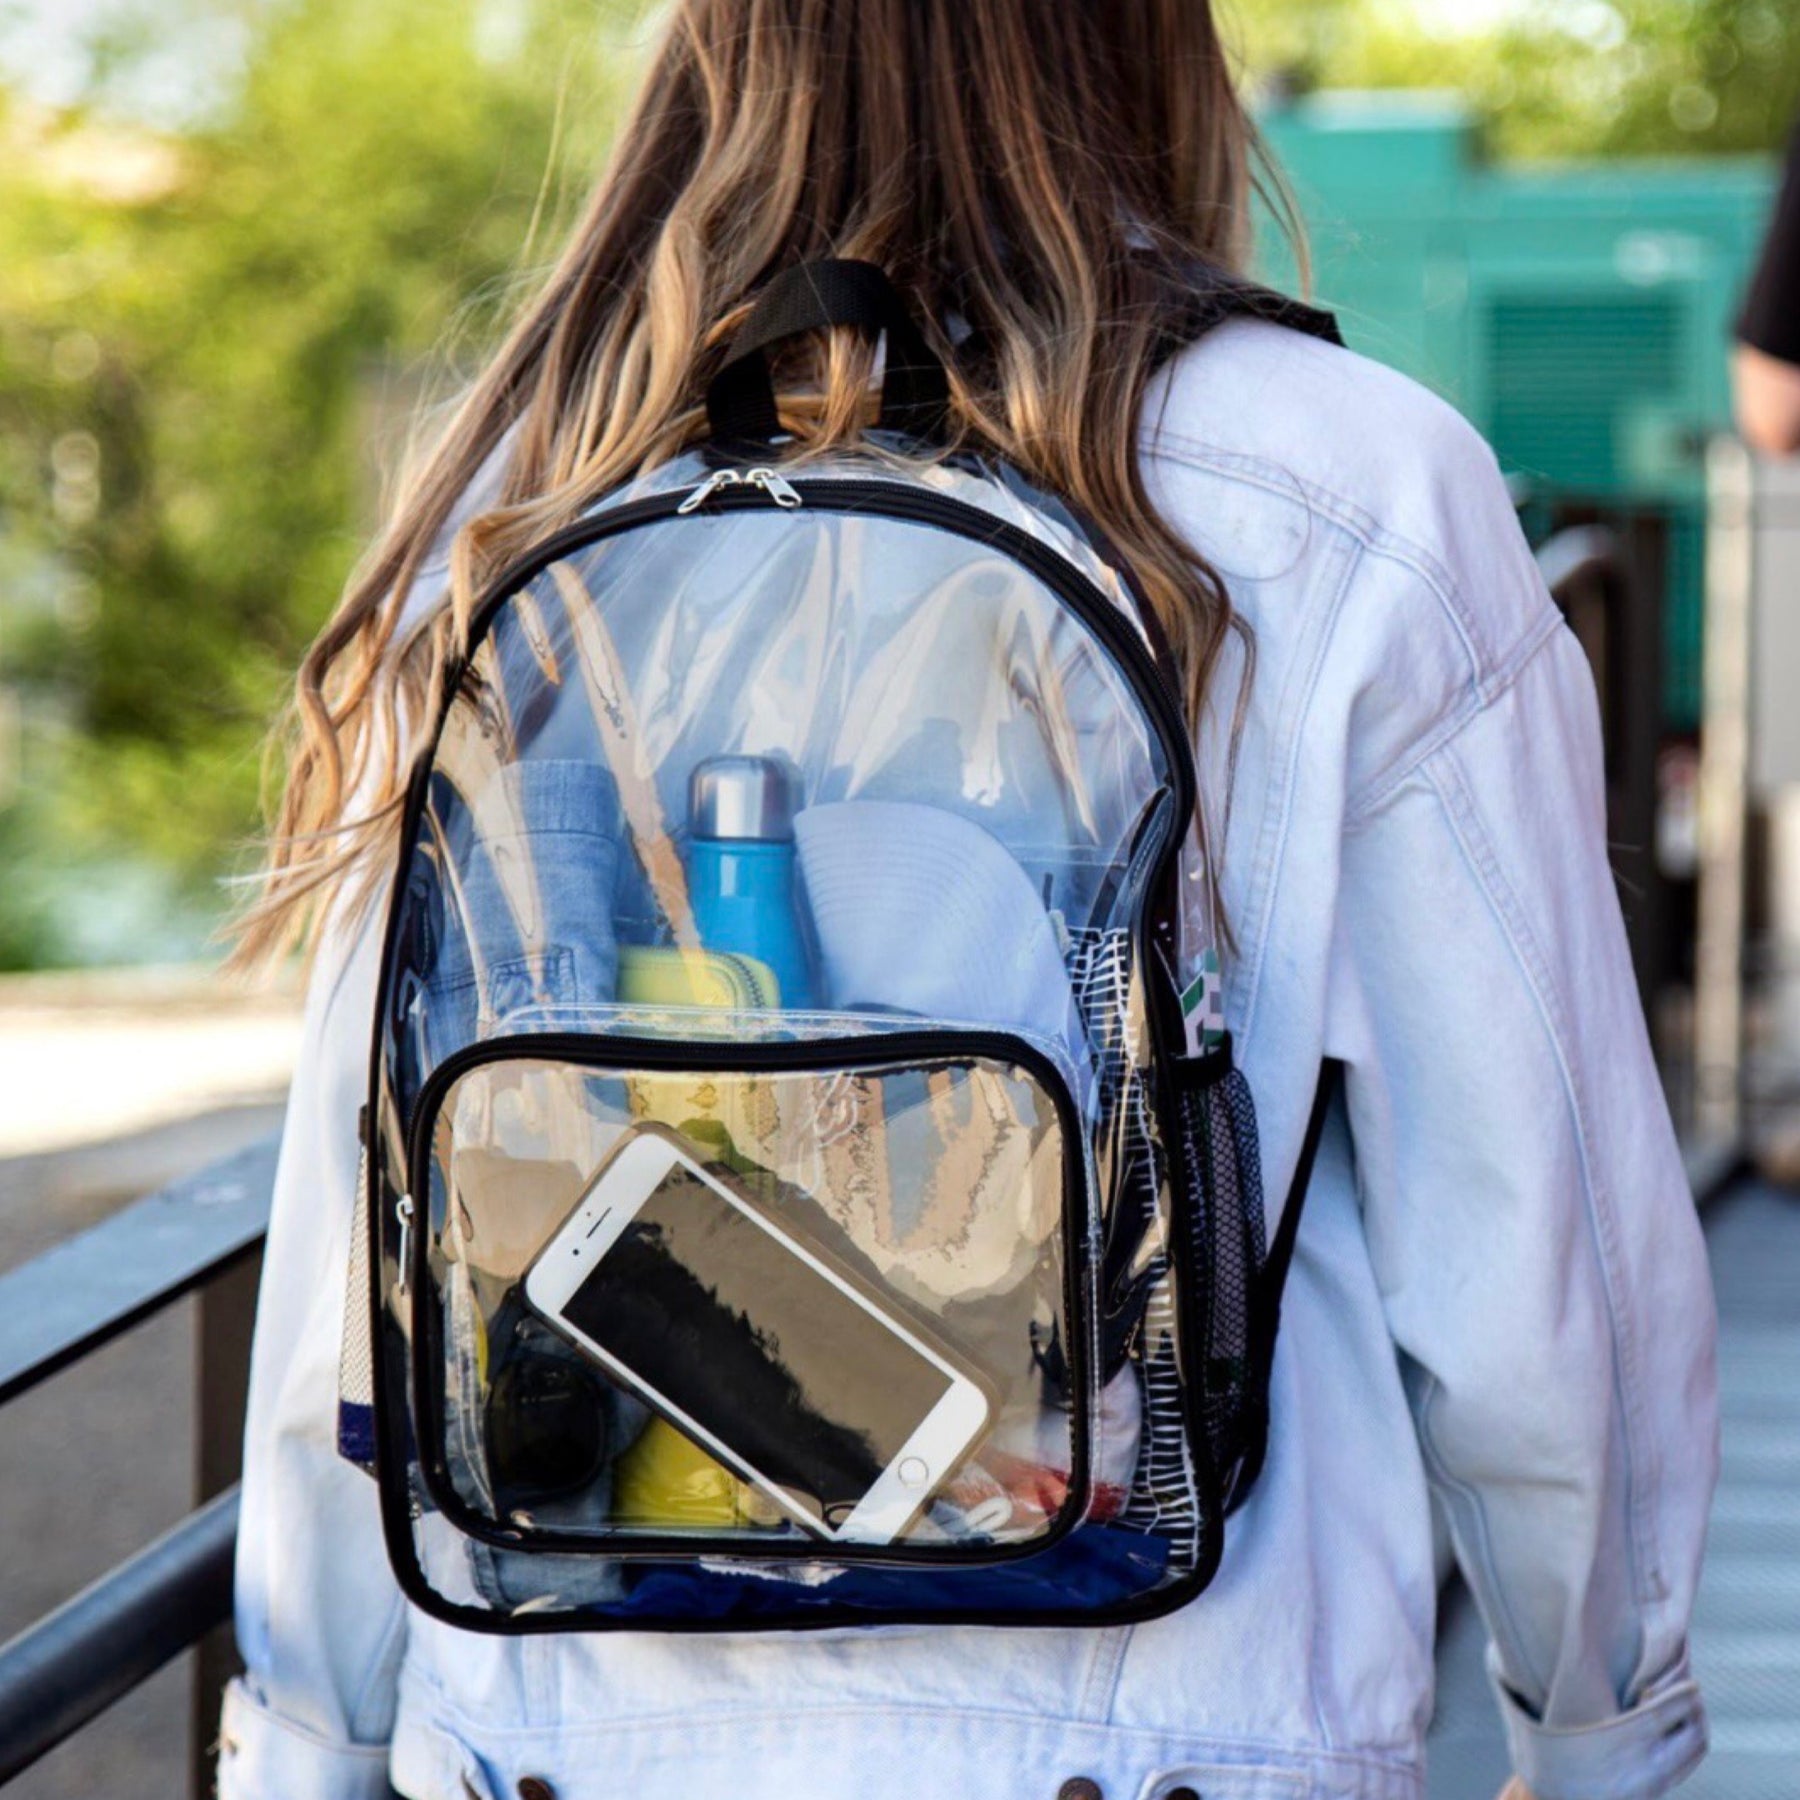 Transparent Clear Backpack - For Concerts, Stadium-Approved